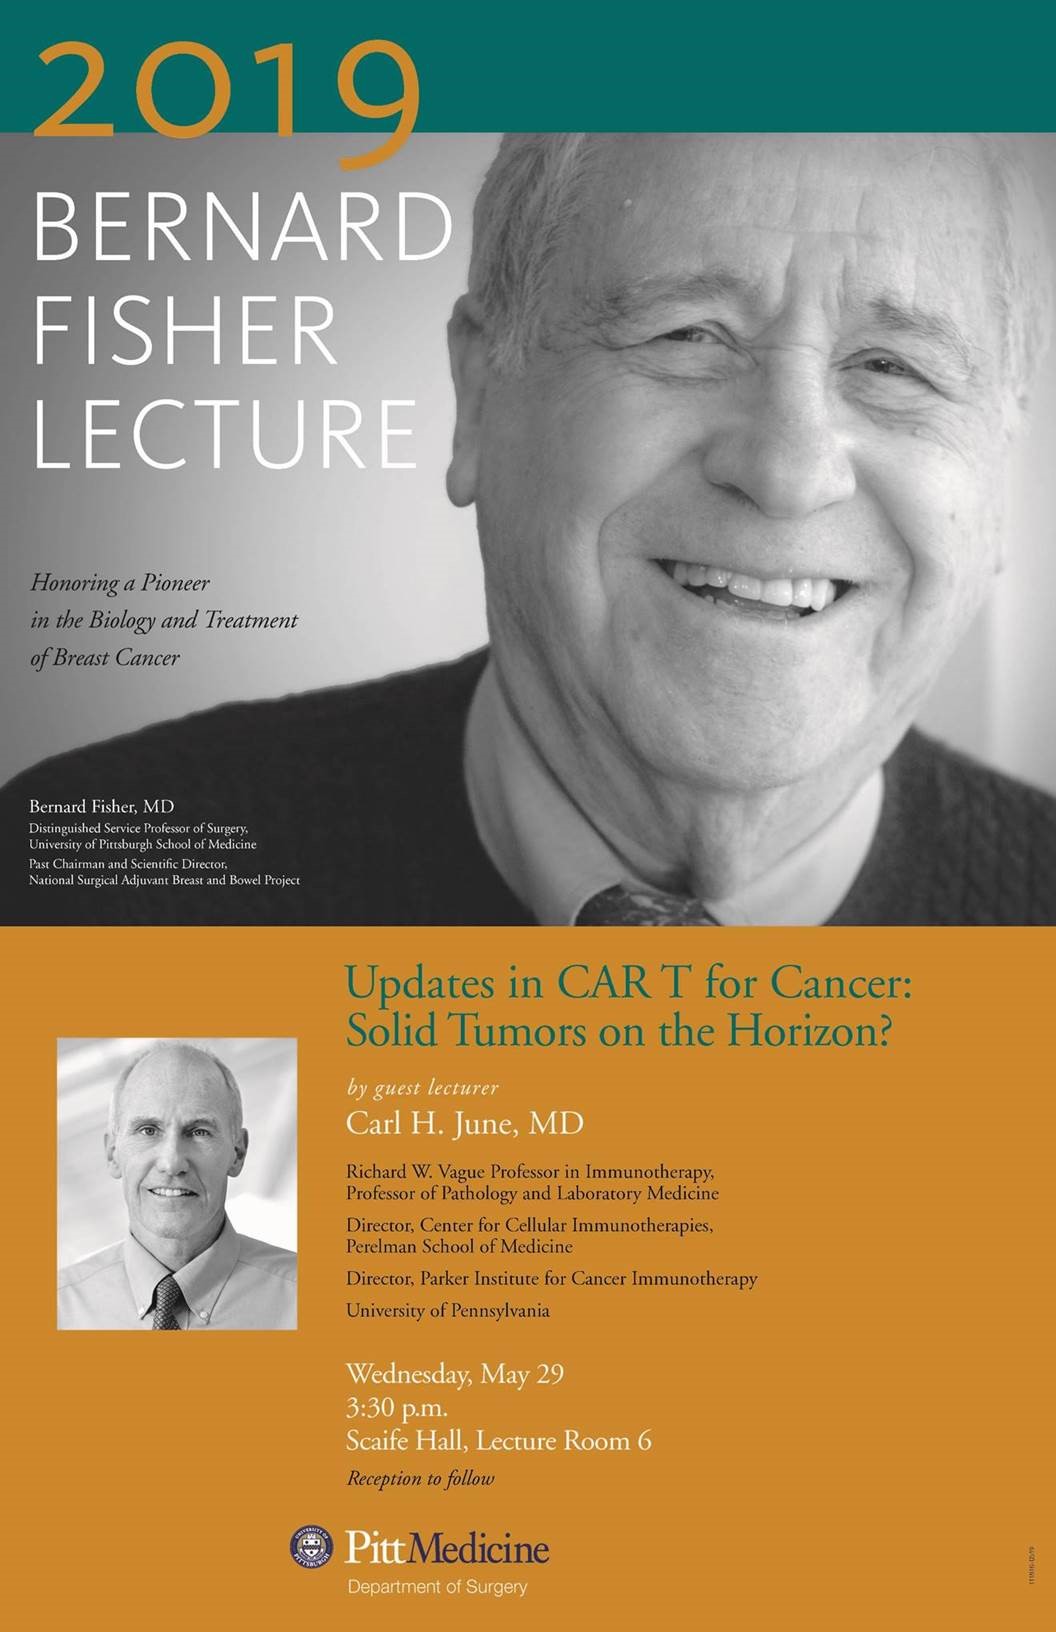 2019 Bernard Fisher lecture poster